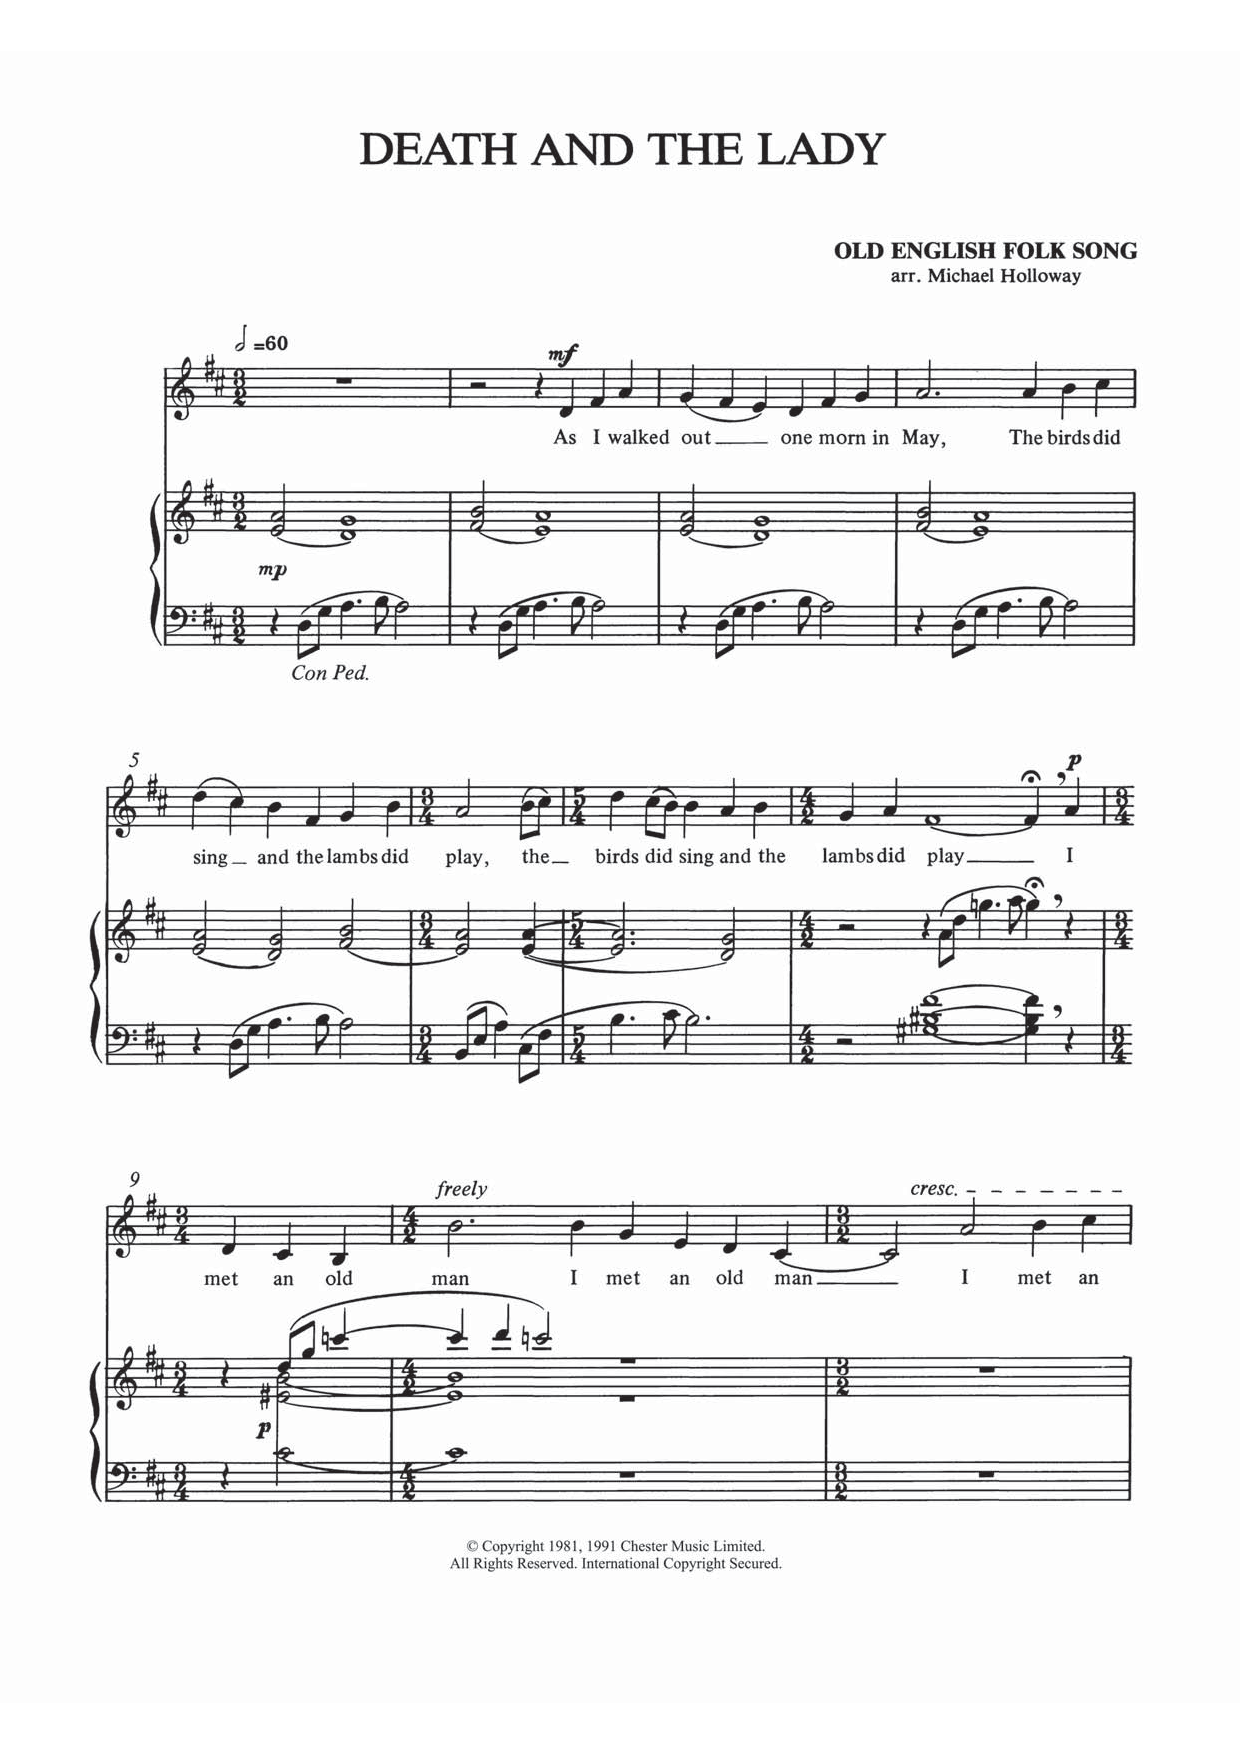 Download Traditional Death And The Lady Sheet Music